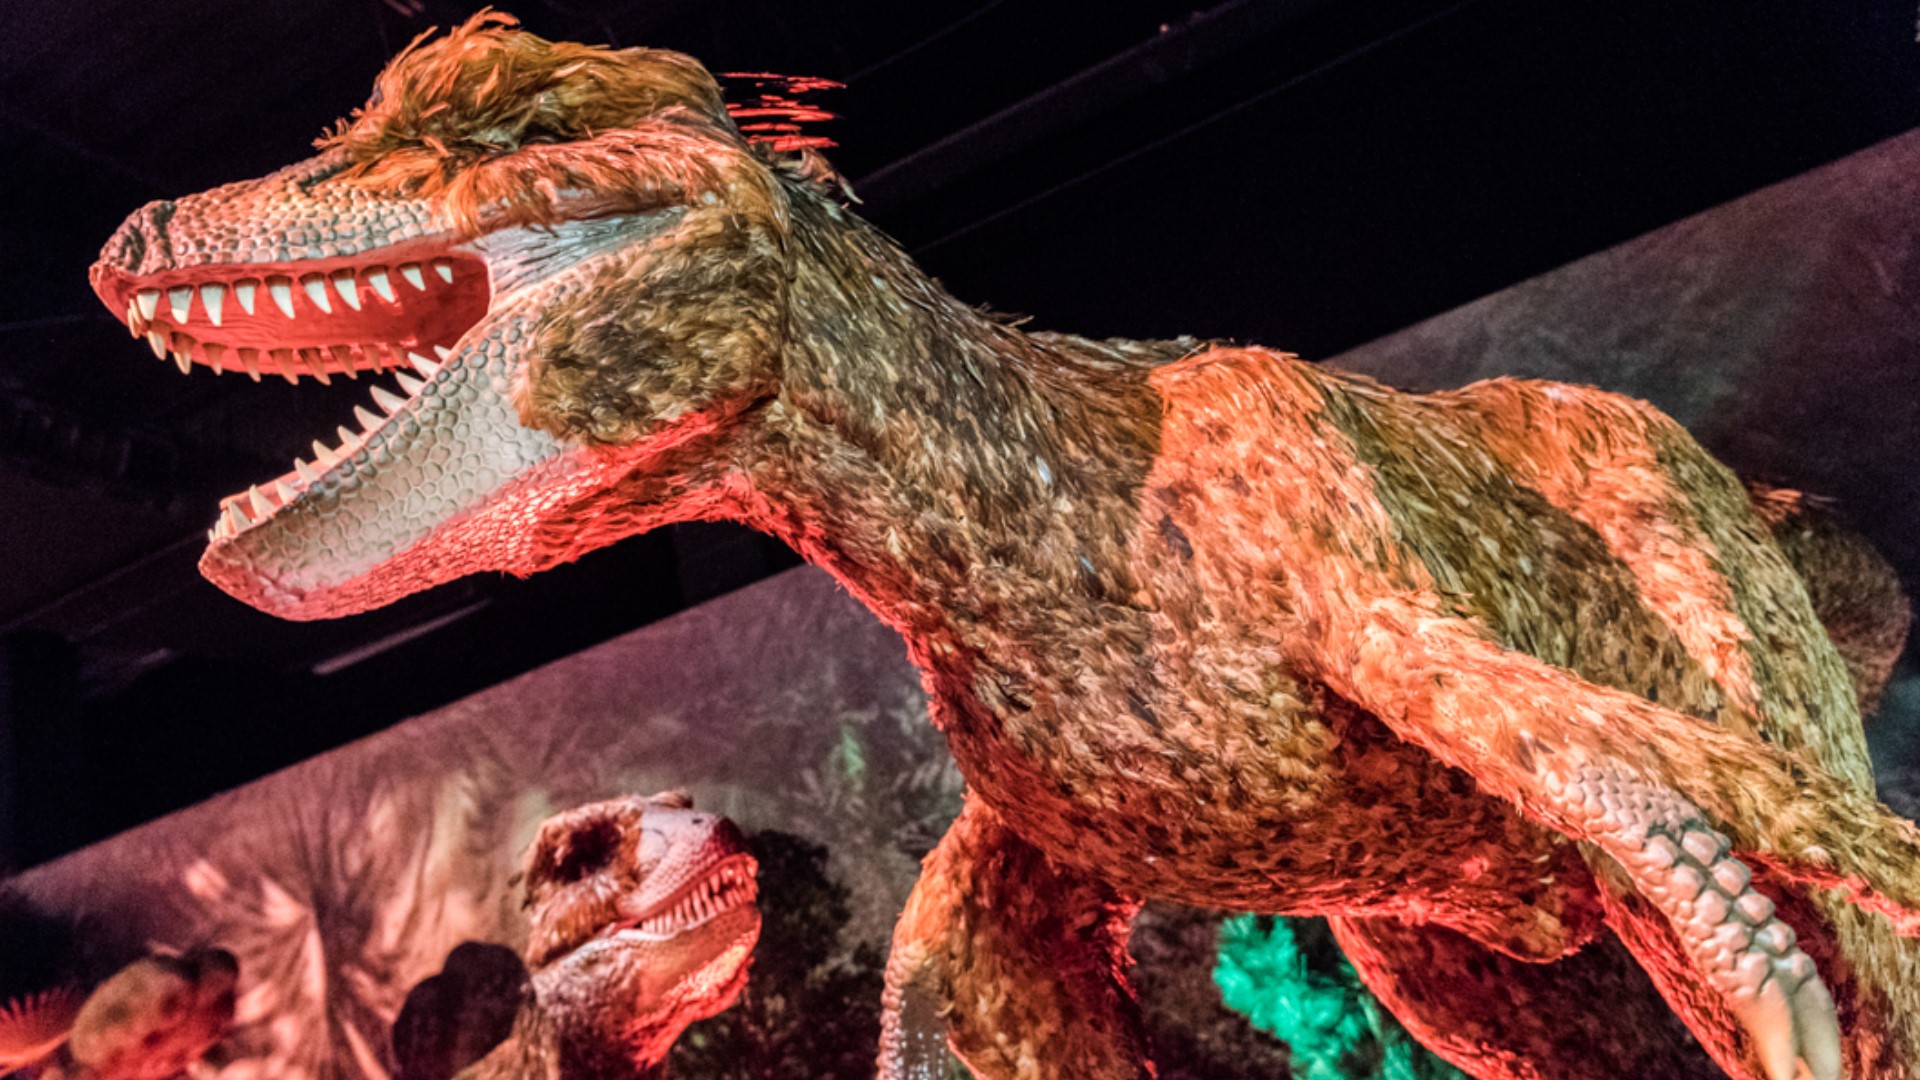 From dinosaurs at OMSI to aerial adventure courses, there are plenty of local activities for the whole family to enjoy.